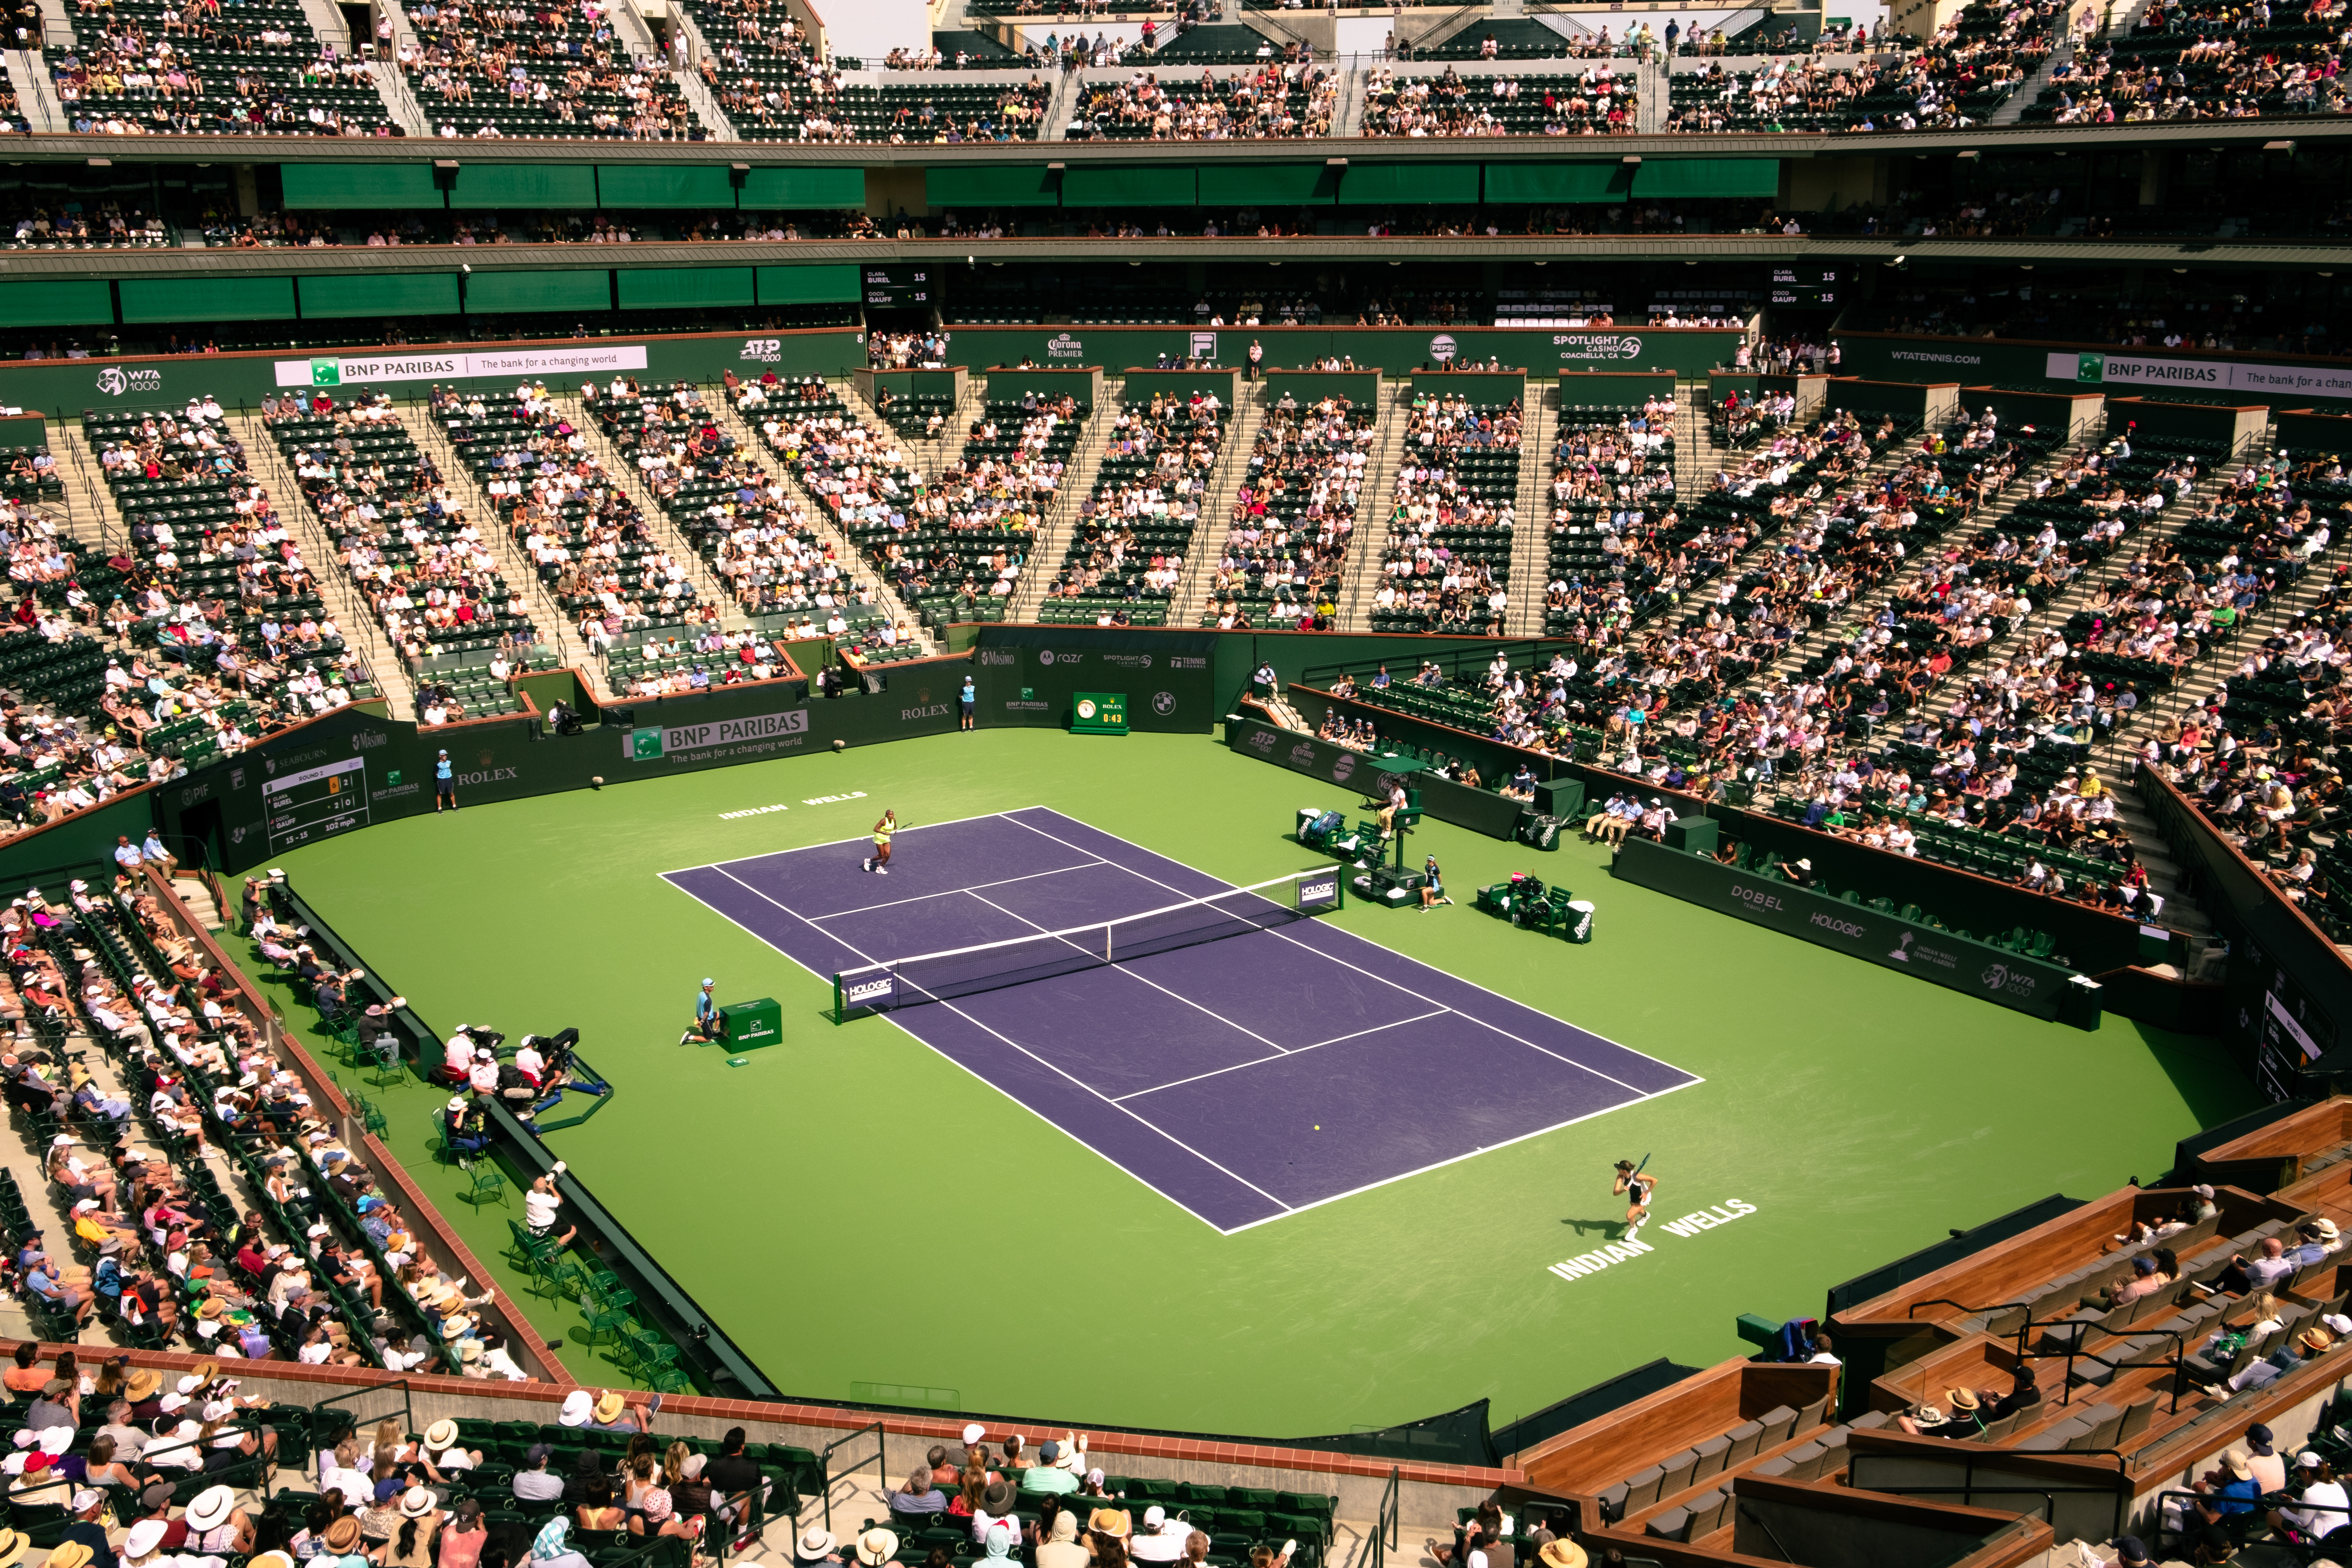 A view of the green and purple court at Indian Wells.